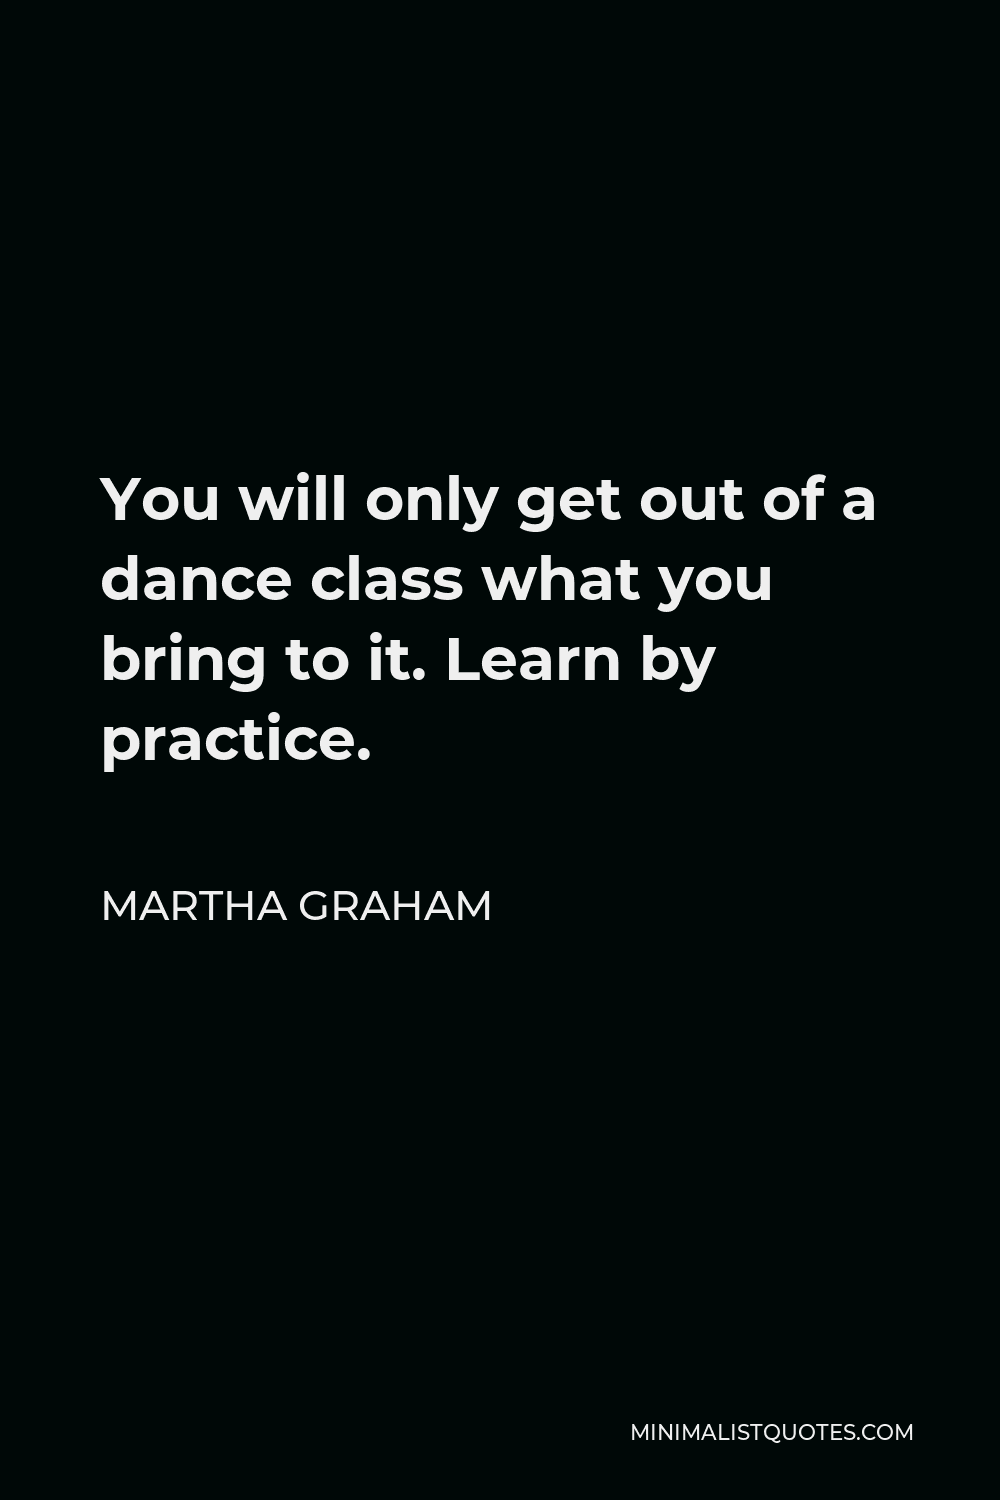 Martha Graham Quote - You will only get out of a dance class what you bring to it. Learn by practice.